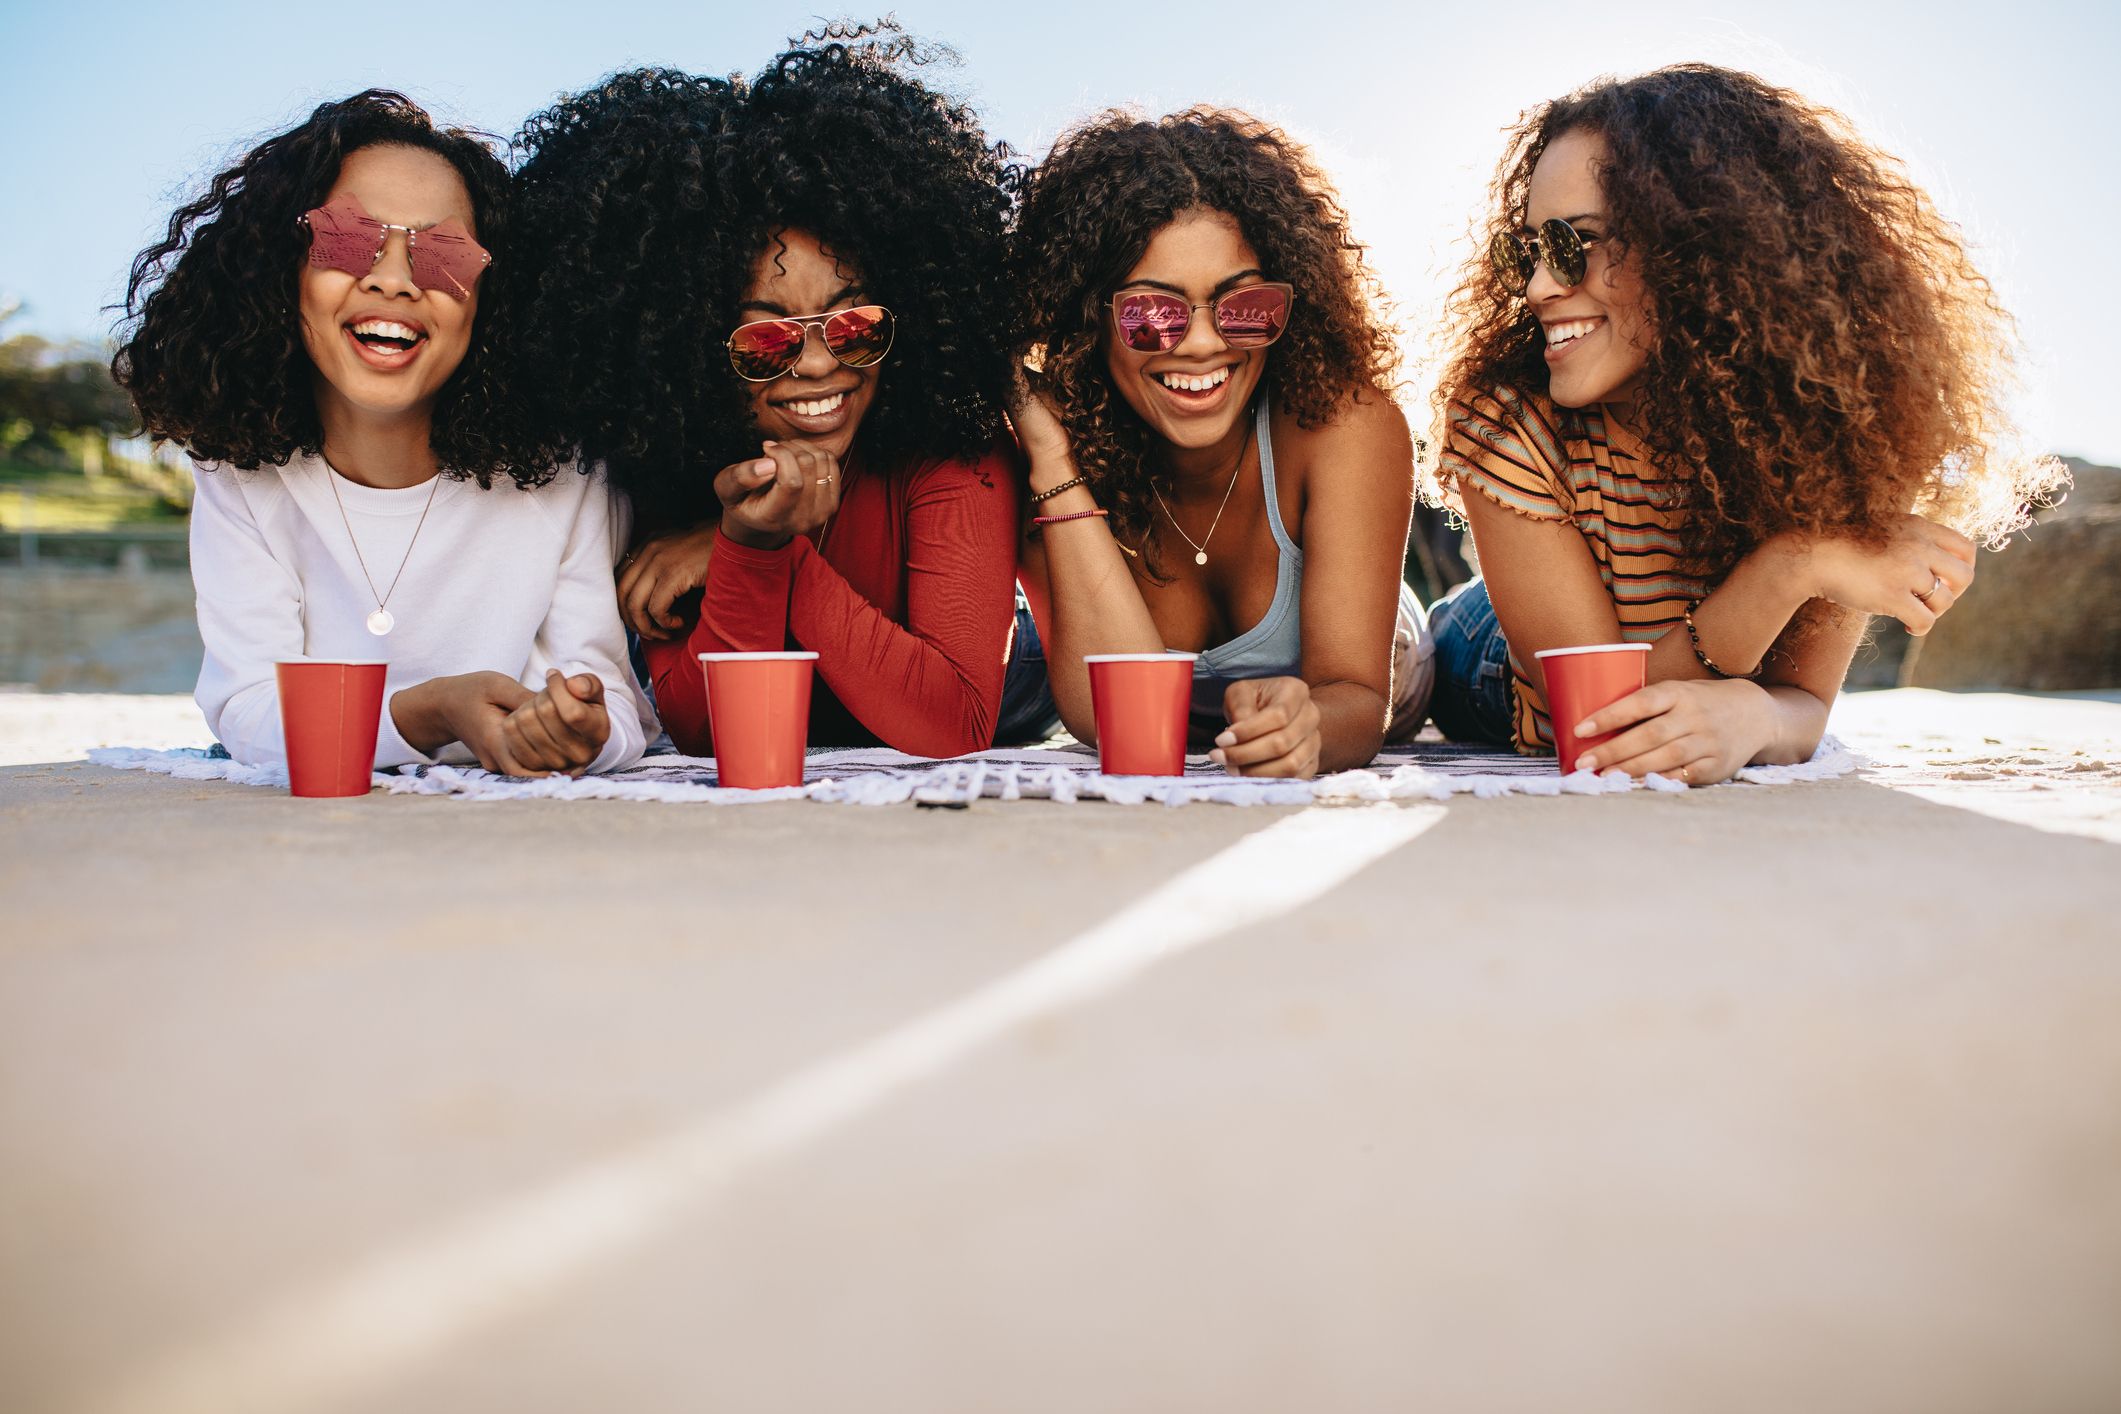 <p>Nothing brings girlfriends closer together than <a href="https://www.womansday.com/style/g40063109/best-comfortable-travel-dresses/">travel</a>. And after so many months of travel restrictions, it feels like more people than ever are itching to <a href="https://www.womansday.com/life/travel-tips/g40014423/family-vacation-ideas/">get away and explore</a> a different zip code for a change. Doing it with your <a href="https://www.womansday.com/life/a38526800/best-friend-instagram-captions/">friends</a> on a dedicated girls' trip without kids, spouses, and bosses looking over your shoulder is the perfect way to unwind, reconnect, mellow out and just get excited about life again. </p><p>Once you know who is in for the girls trip of a lifetime, the hardest part is deciding where to go. When it comes to <strong>girls trip ideas </strong>for your <a href="https://www.womansday.com/relationships/family-friends/g35787042/women-friendship-after-30/">circle of friends</a>, there's no shortage of options. Whether you want a weekend road trip, an <a href="https://www.womansday.com/life/travel-tips/a39947860/disney-wish-cruise-ship-details/">adventurous outing</a> exploring a locale off the beaten path, or a budget stay at an underrated hideaway, we’ve rounded up some of the best domestic and international destinations for a girls' trip.</p><p>To help narrow it down further, think about whether your group of friends is craving some exciting <a href="https://www.womansday.com/life/travel-tips/a40048573/beach-instagram-captions/">beach time</a>, a quaint and sophisticated stay at a small-town bed and breakfast, a digital detox, or somewhere known for its robust nightlife. No matter where you go, you’ll be guaranteed a good time as long as you stay safe, remain mindful of <a href="https://www.womansday.com/health-fitness/wellness/a38746451/best-face-masks-omicron-covid-variant/">current COVID protocols</a>, and <a href="https://www.womansday.com/life/travel-tips/g3239/travel-gifts-women/">immerse yourself in the experience</a> while building memories with your best girlfriends. </p>